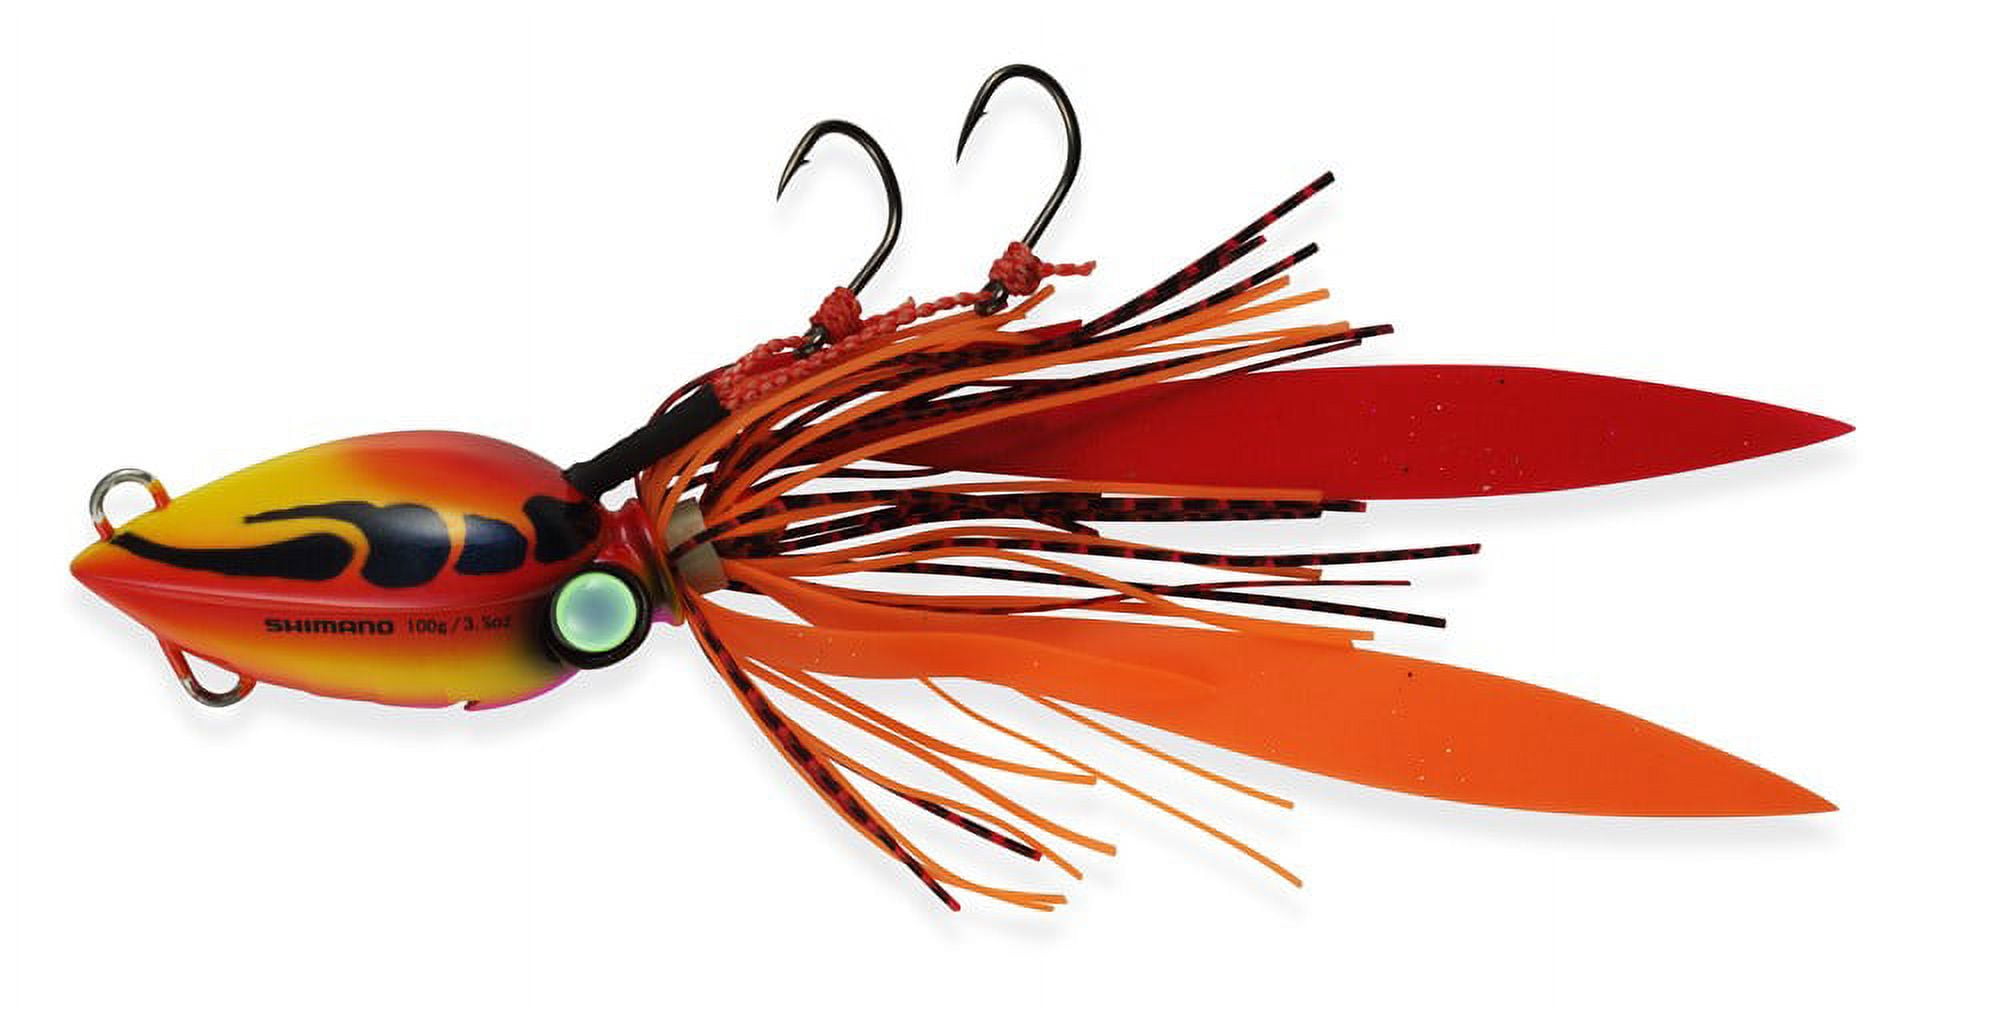 Ultimate Fishing - Fast fish on a slow jig. The Shimano Lucanus